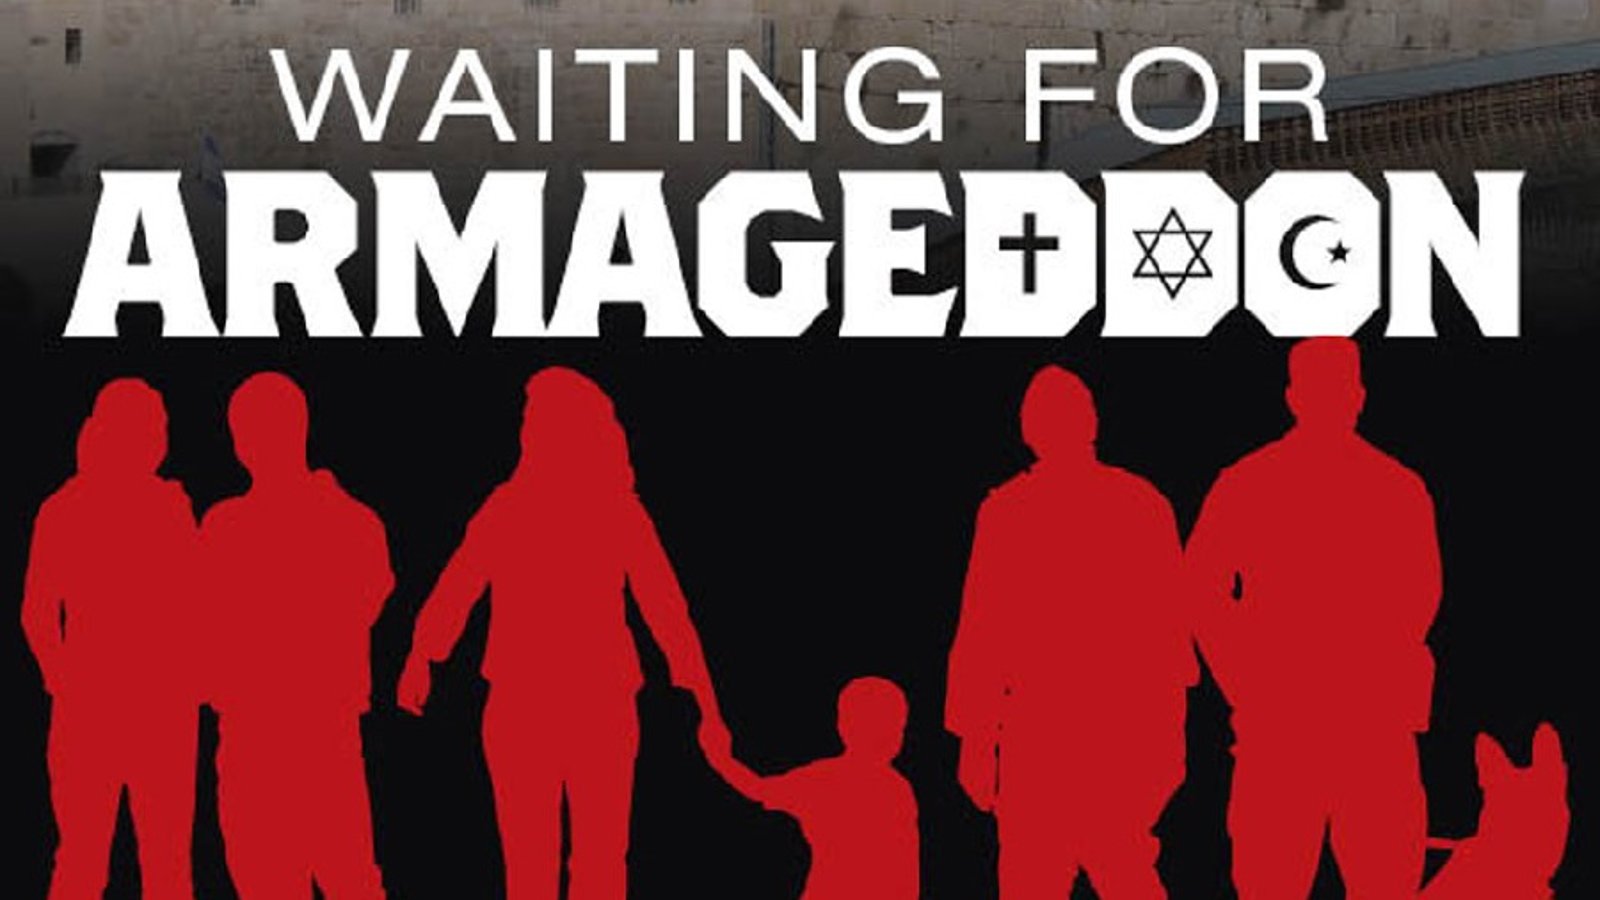 Waiting for Armageddon - The Evangelical Community and Biblical Prophecy